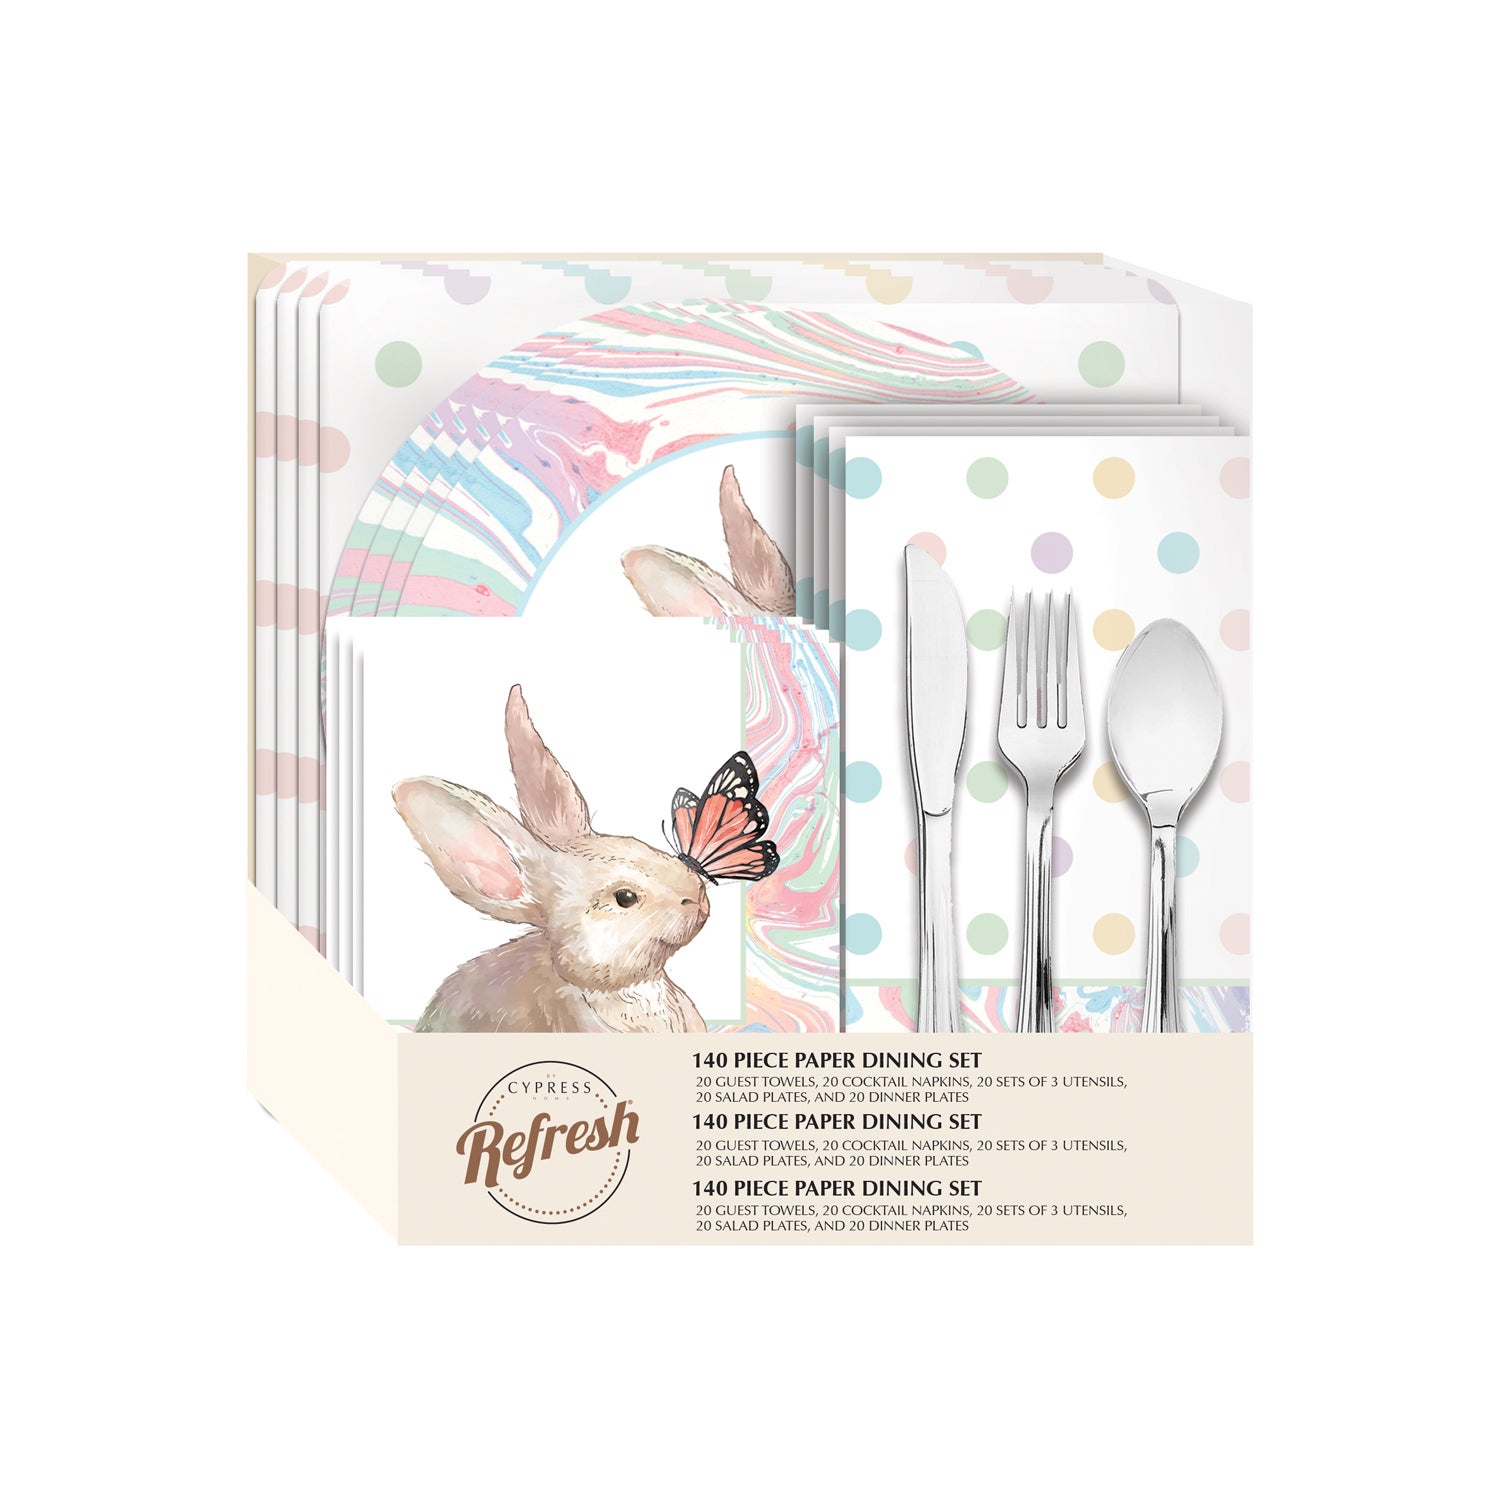 Sweet Hello 85 Piece Paper Dining Gift Set, Party for 10